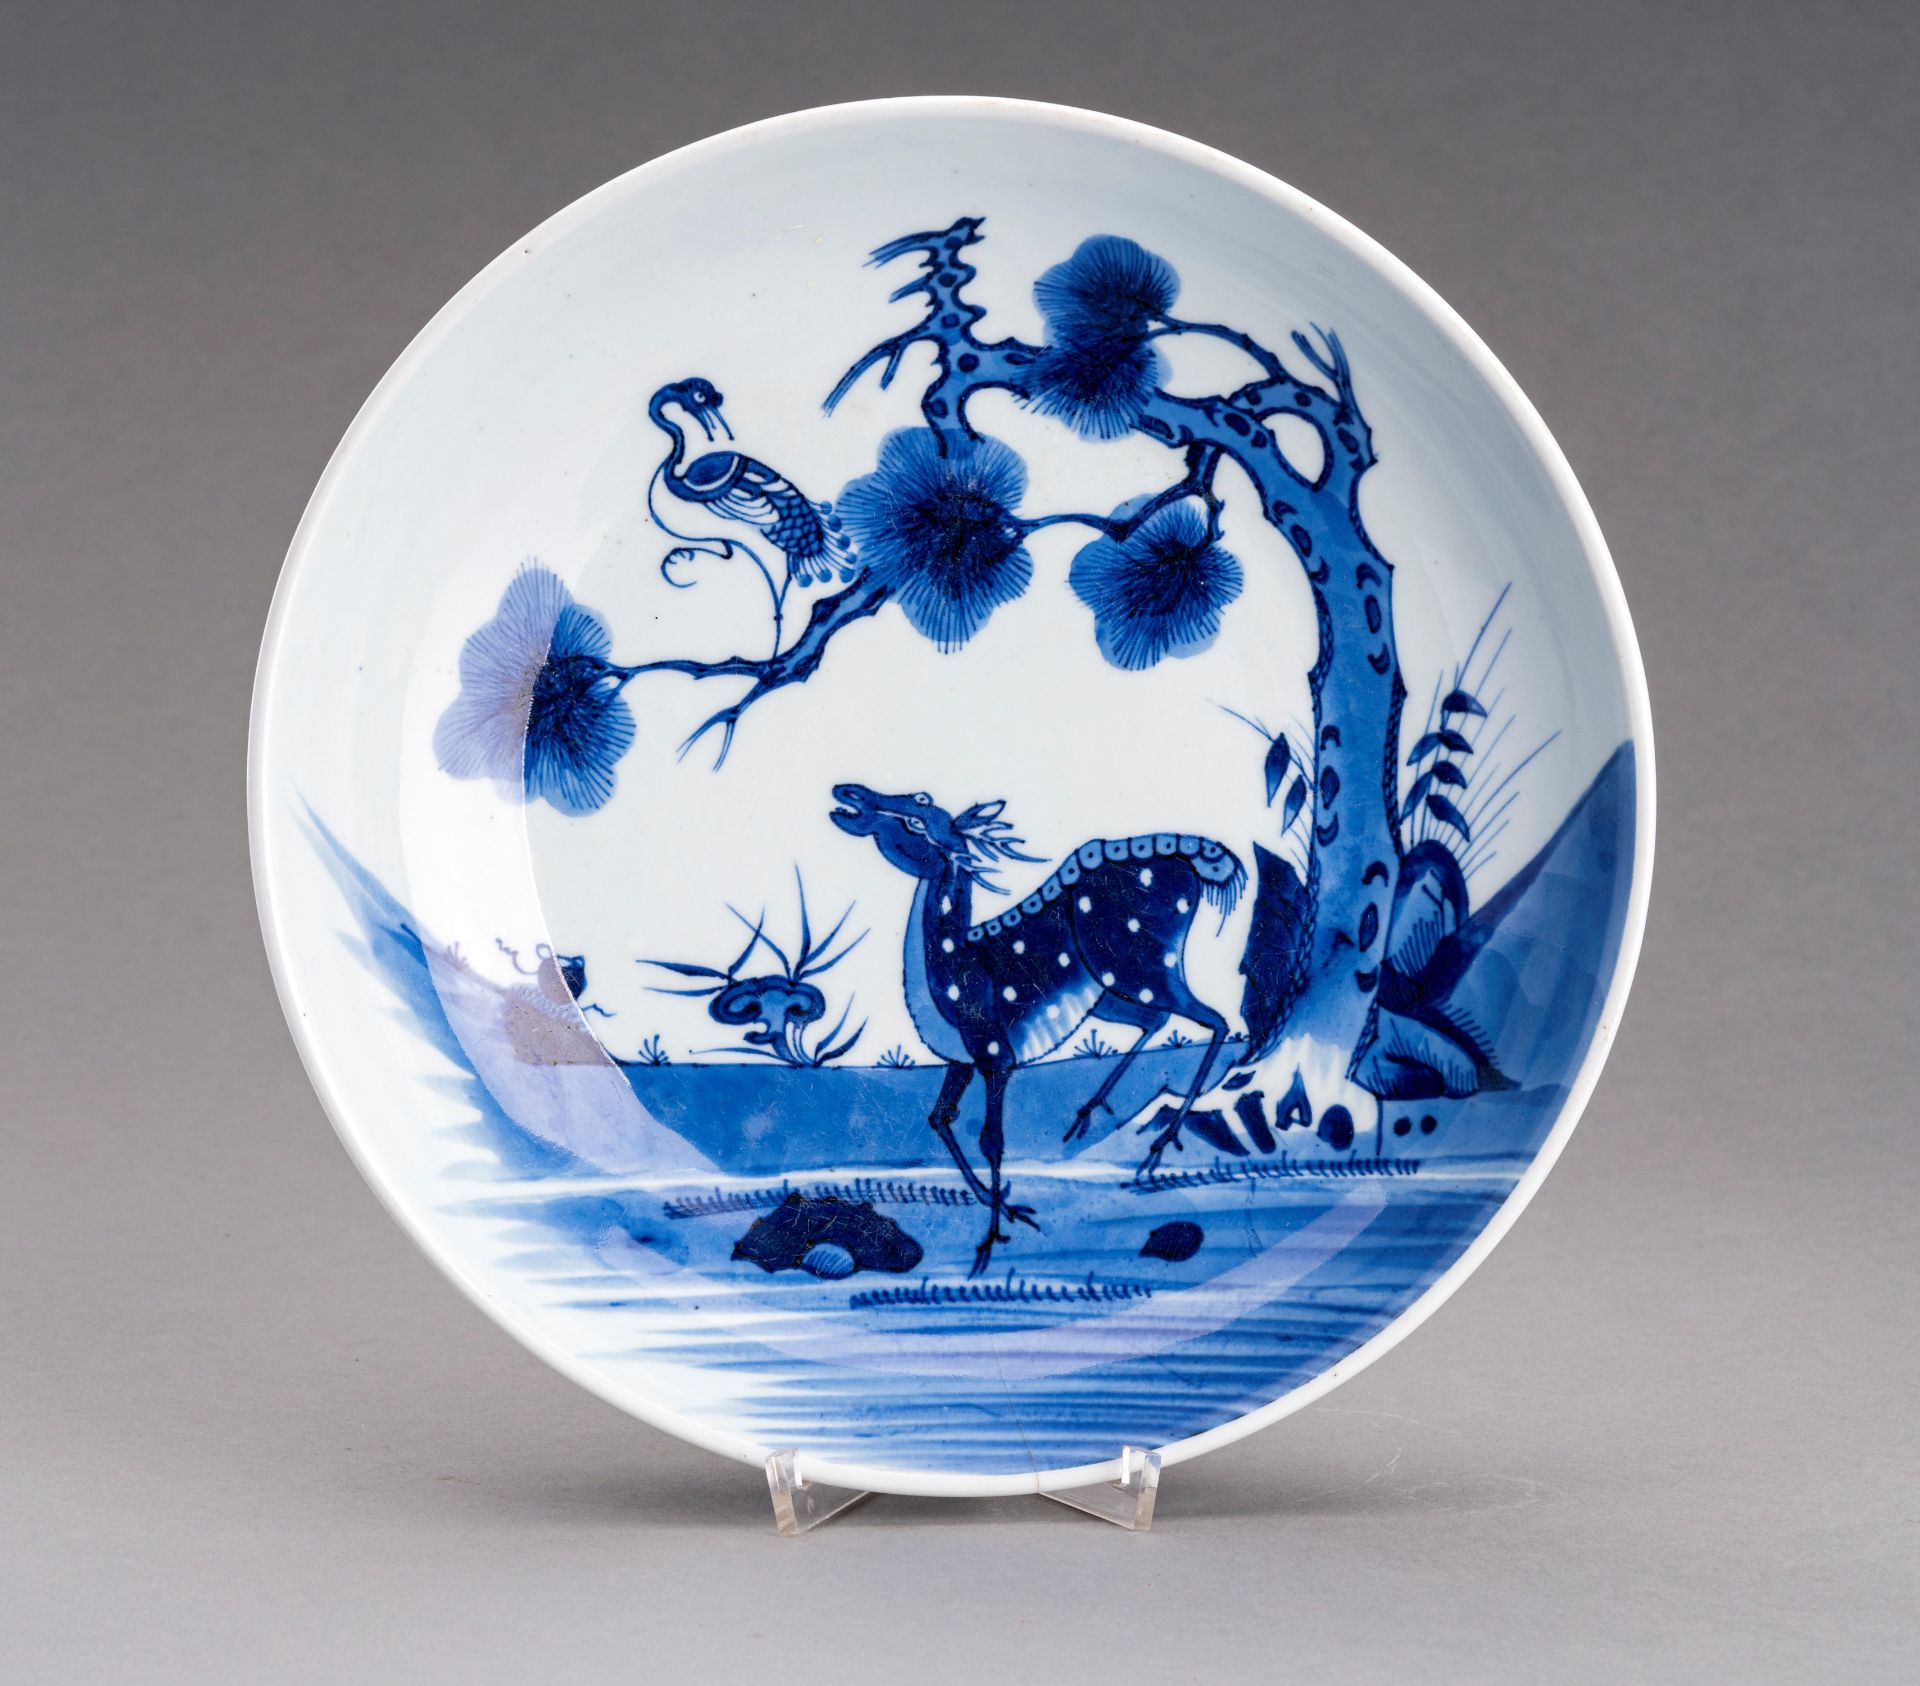 A BLUE AND WHITE 'DEER AND CRANE' PORCELAIN DISH, QING DYNASTY